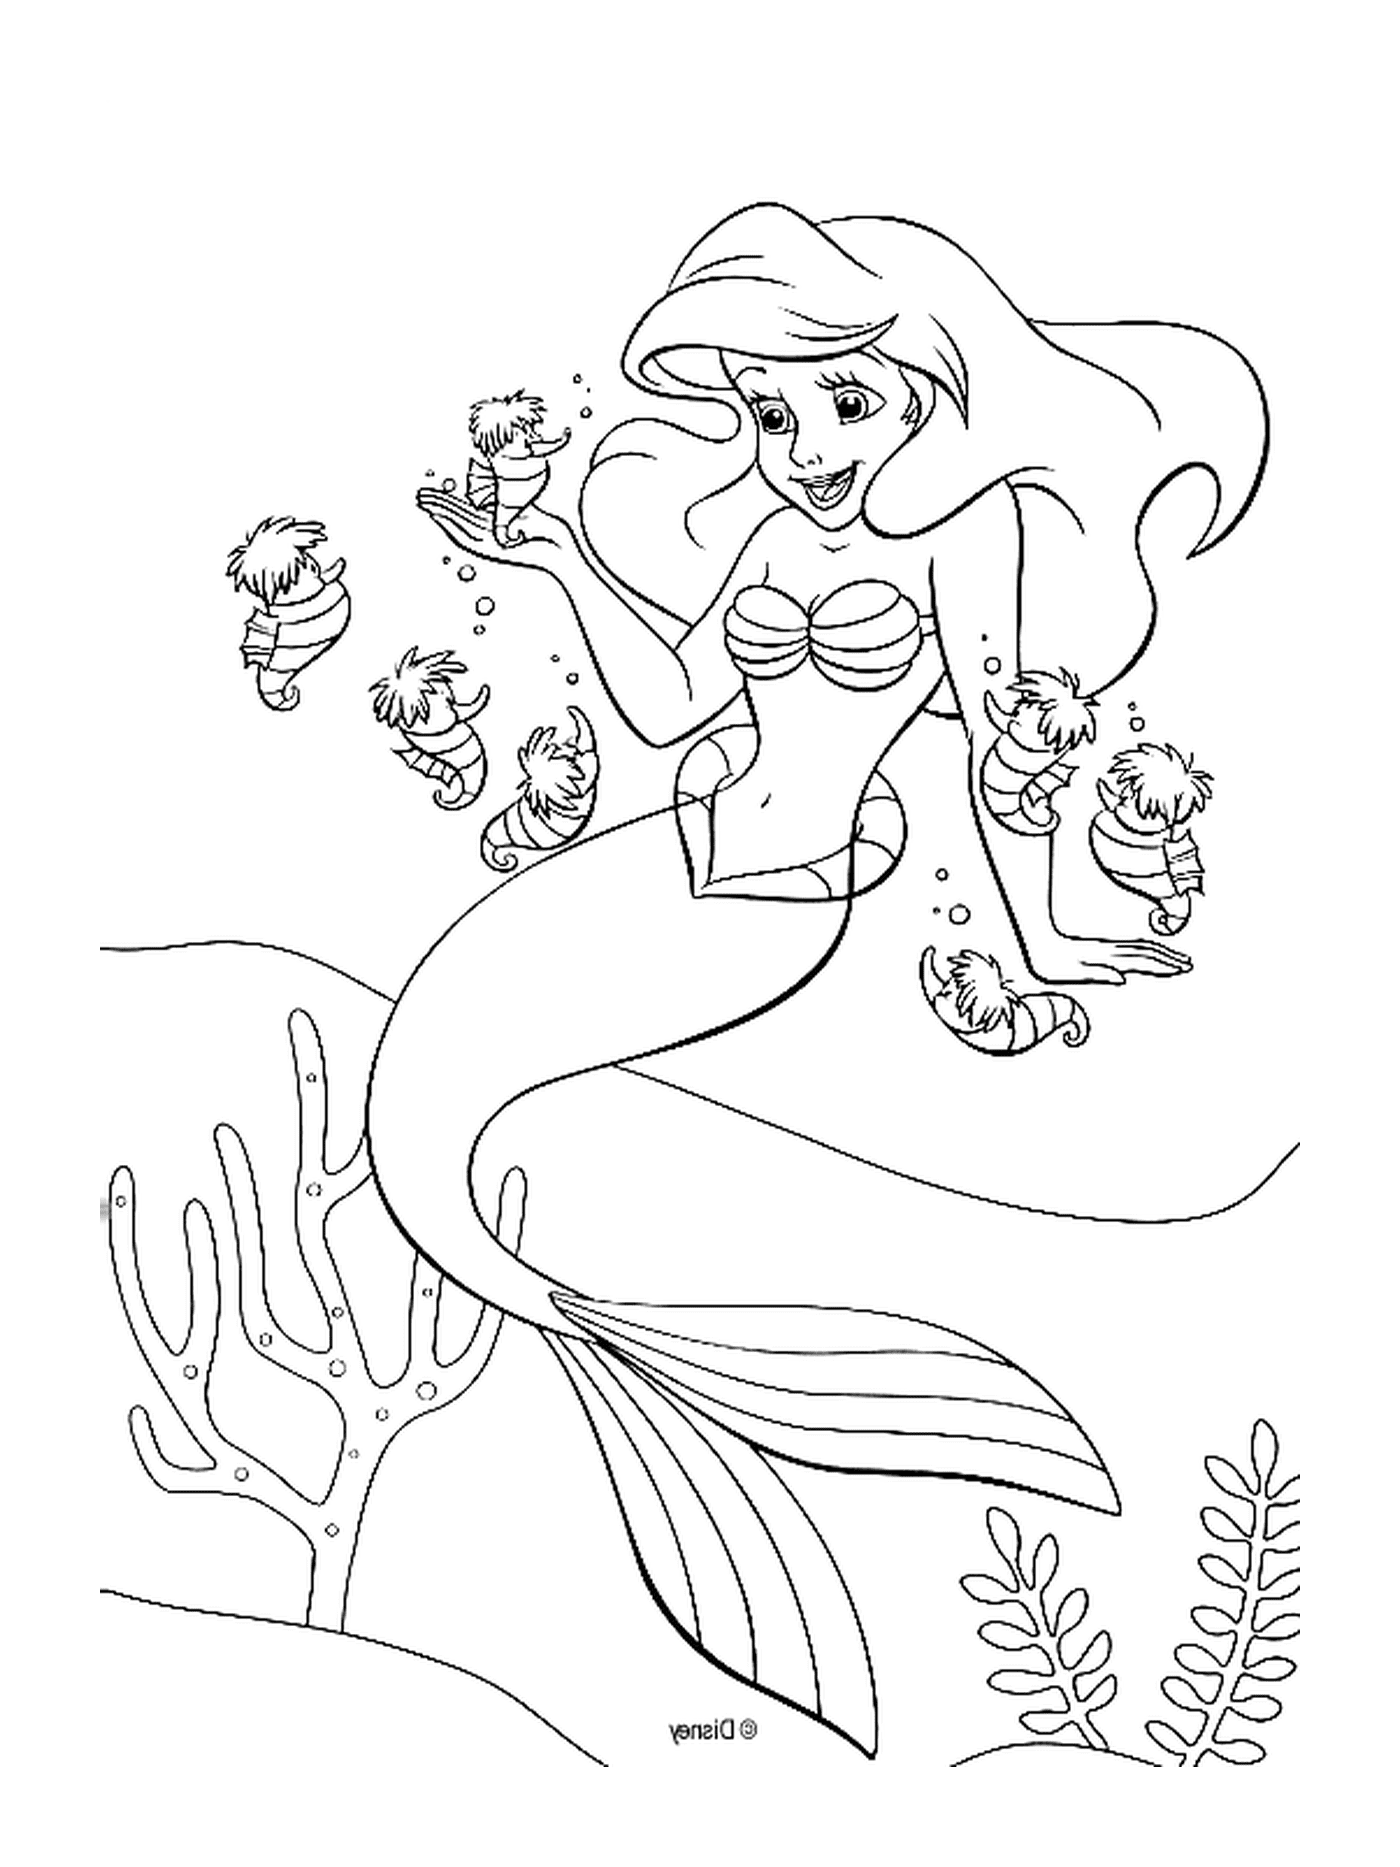  Mermaid surrounded by marine creatures 